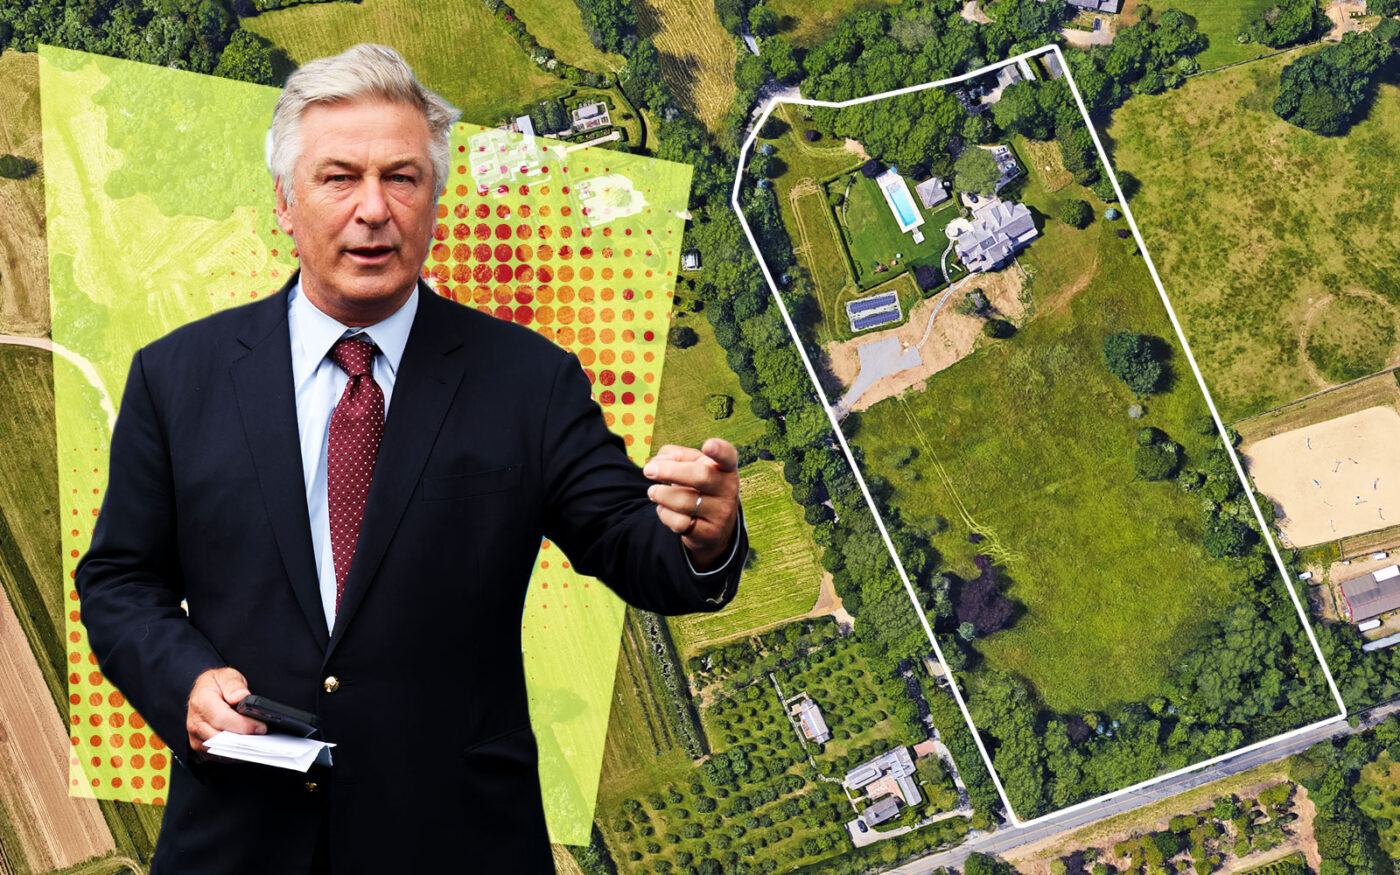 Alec Baldwin Makes Sales Pitch for Amagansett Home